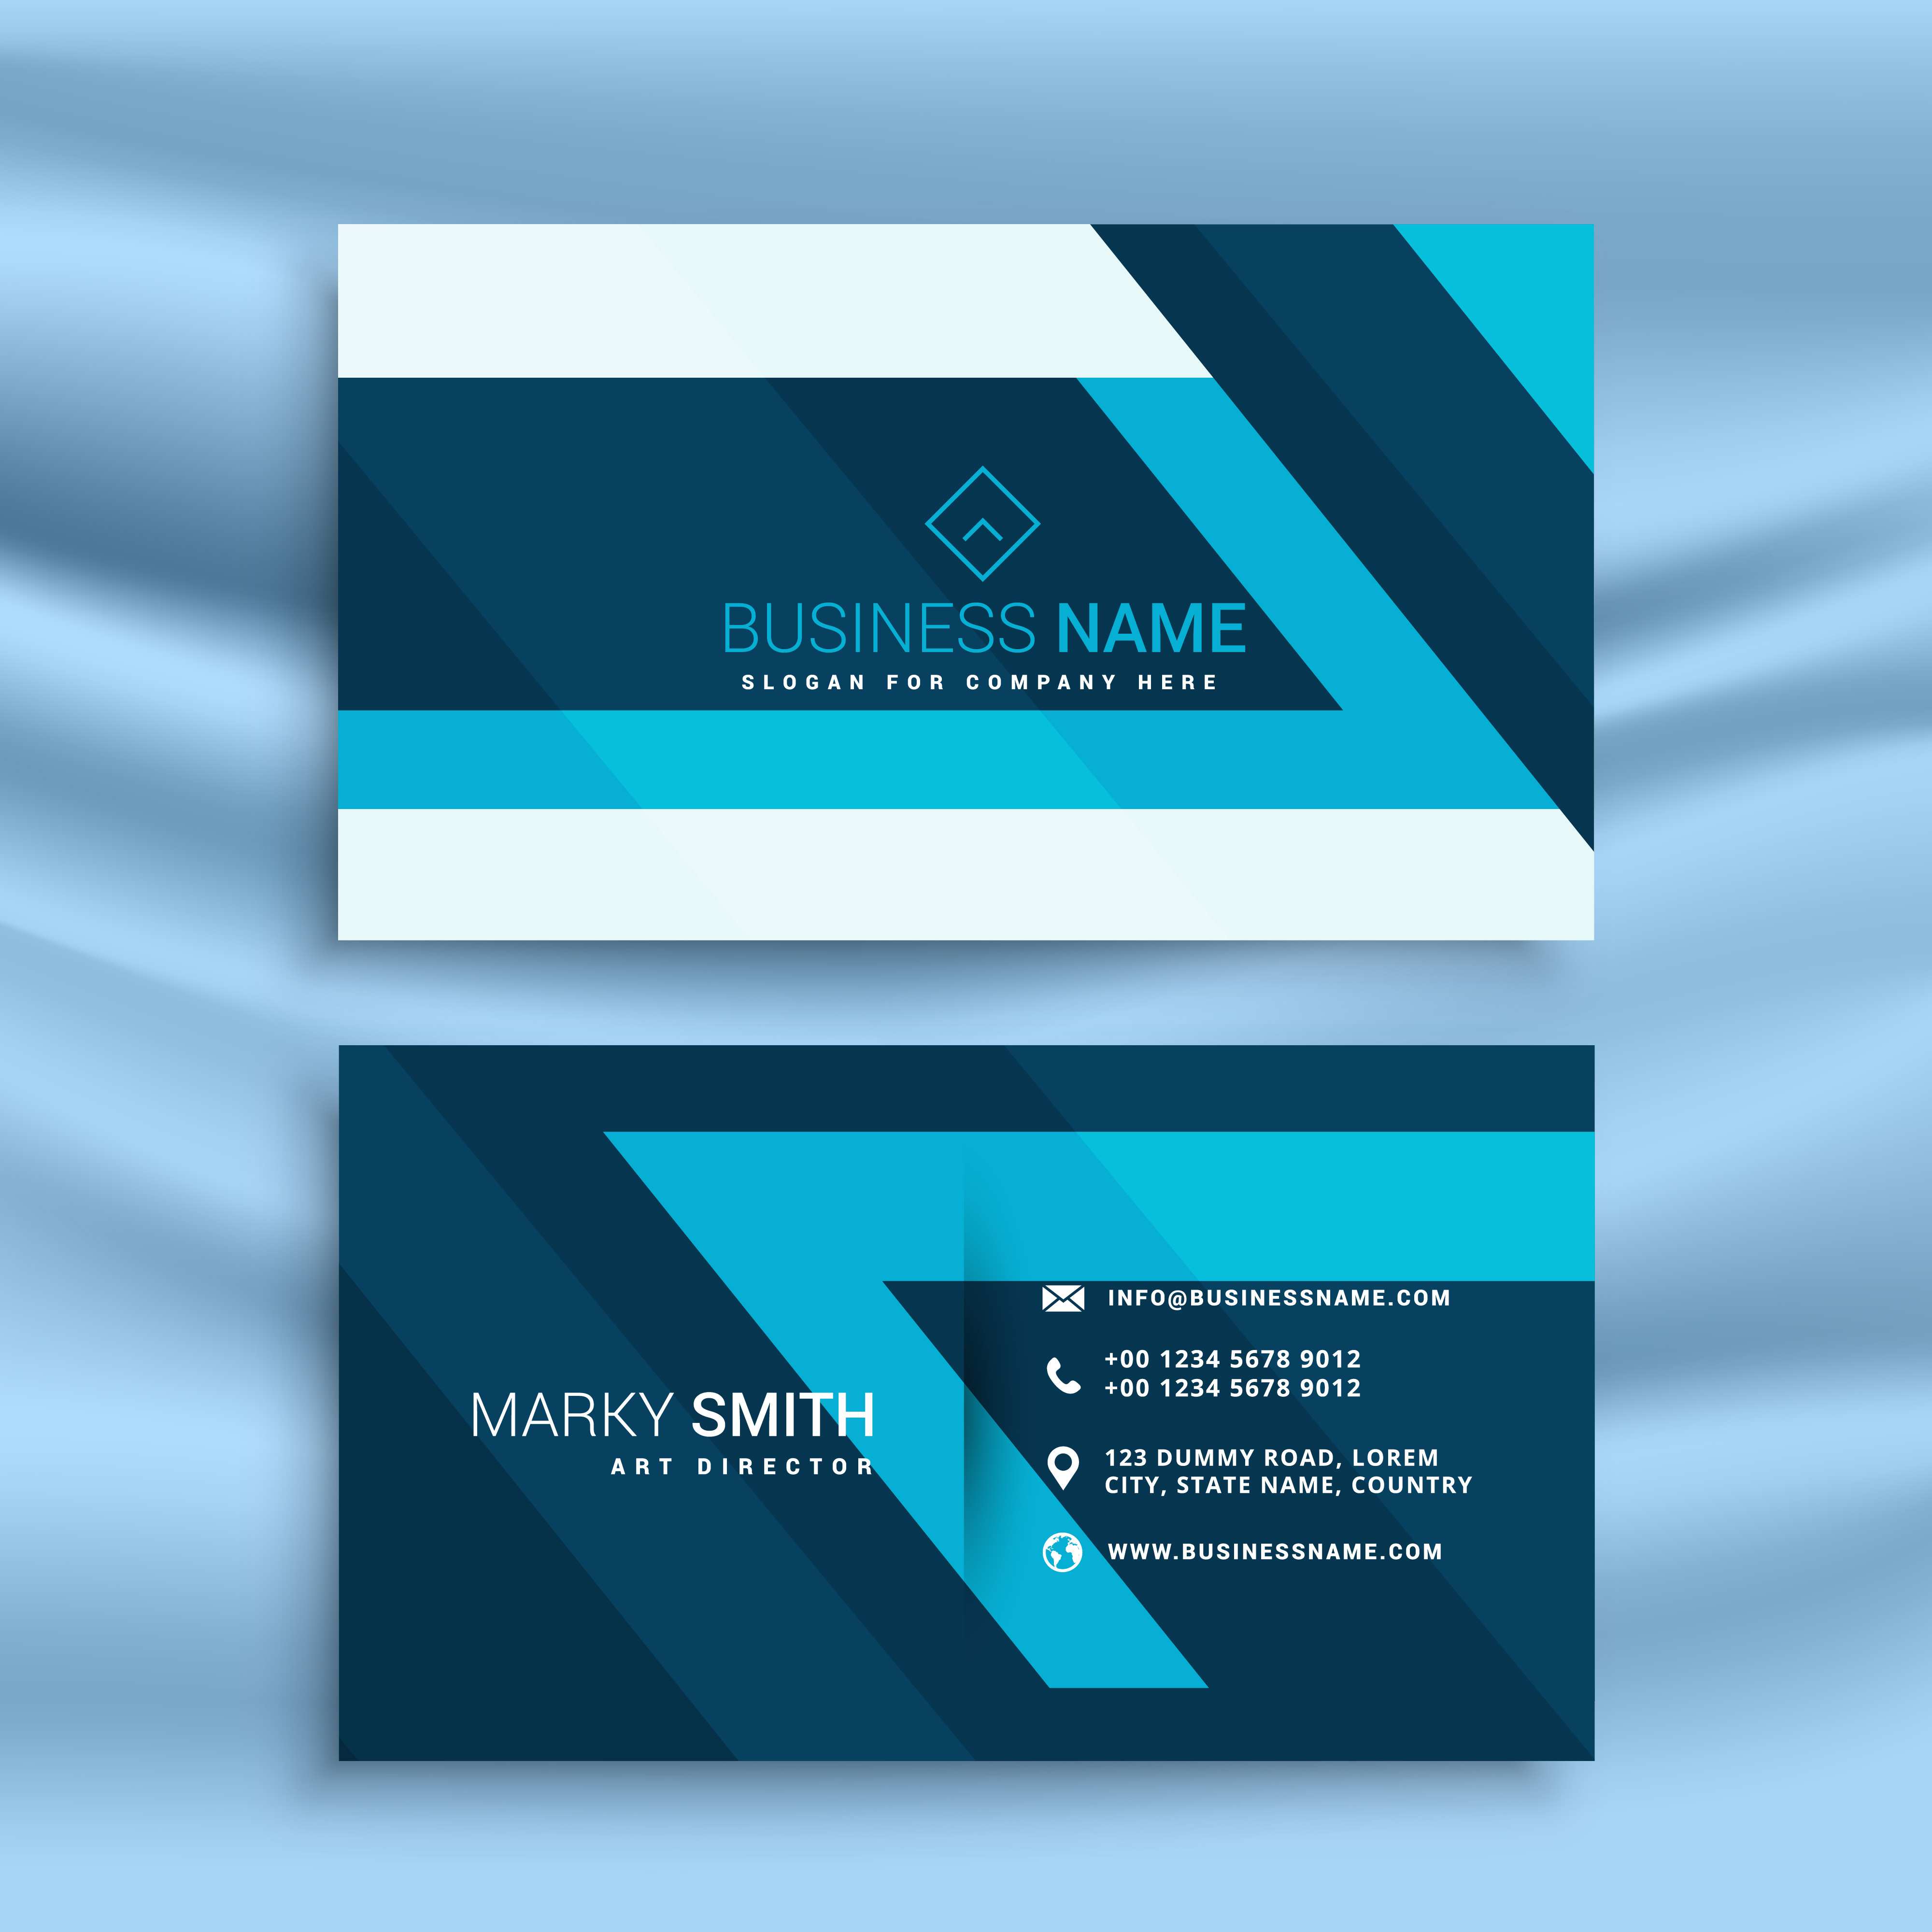 73 The Best Id Card Design Template Ppt PSD File for Id Card Design Template Ppt